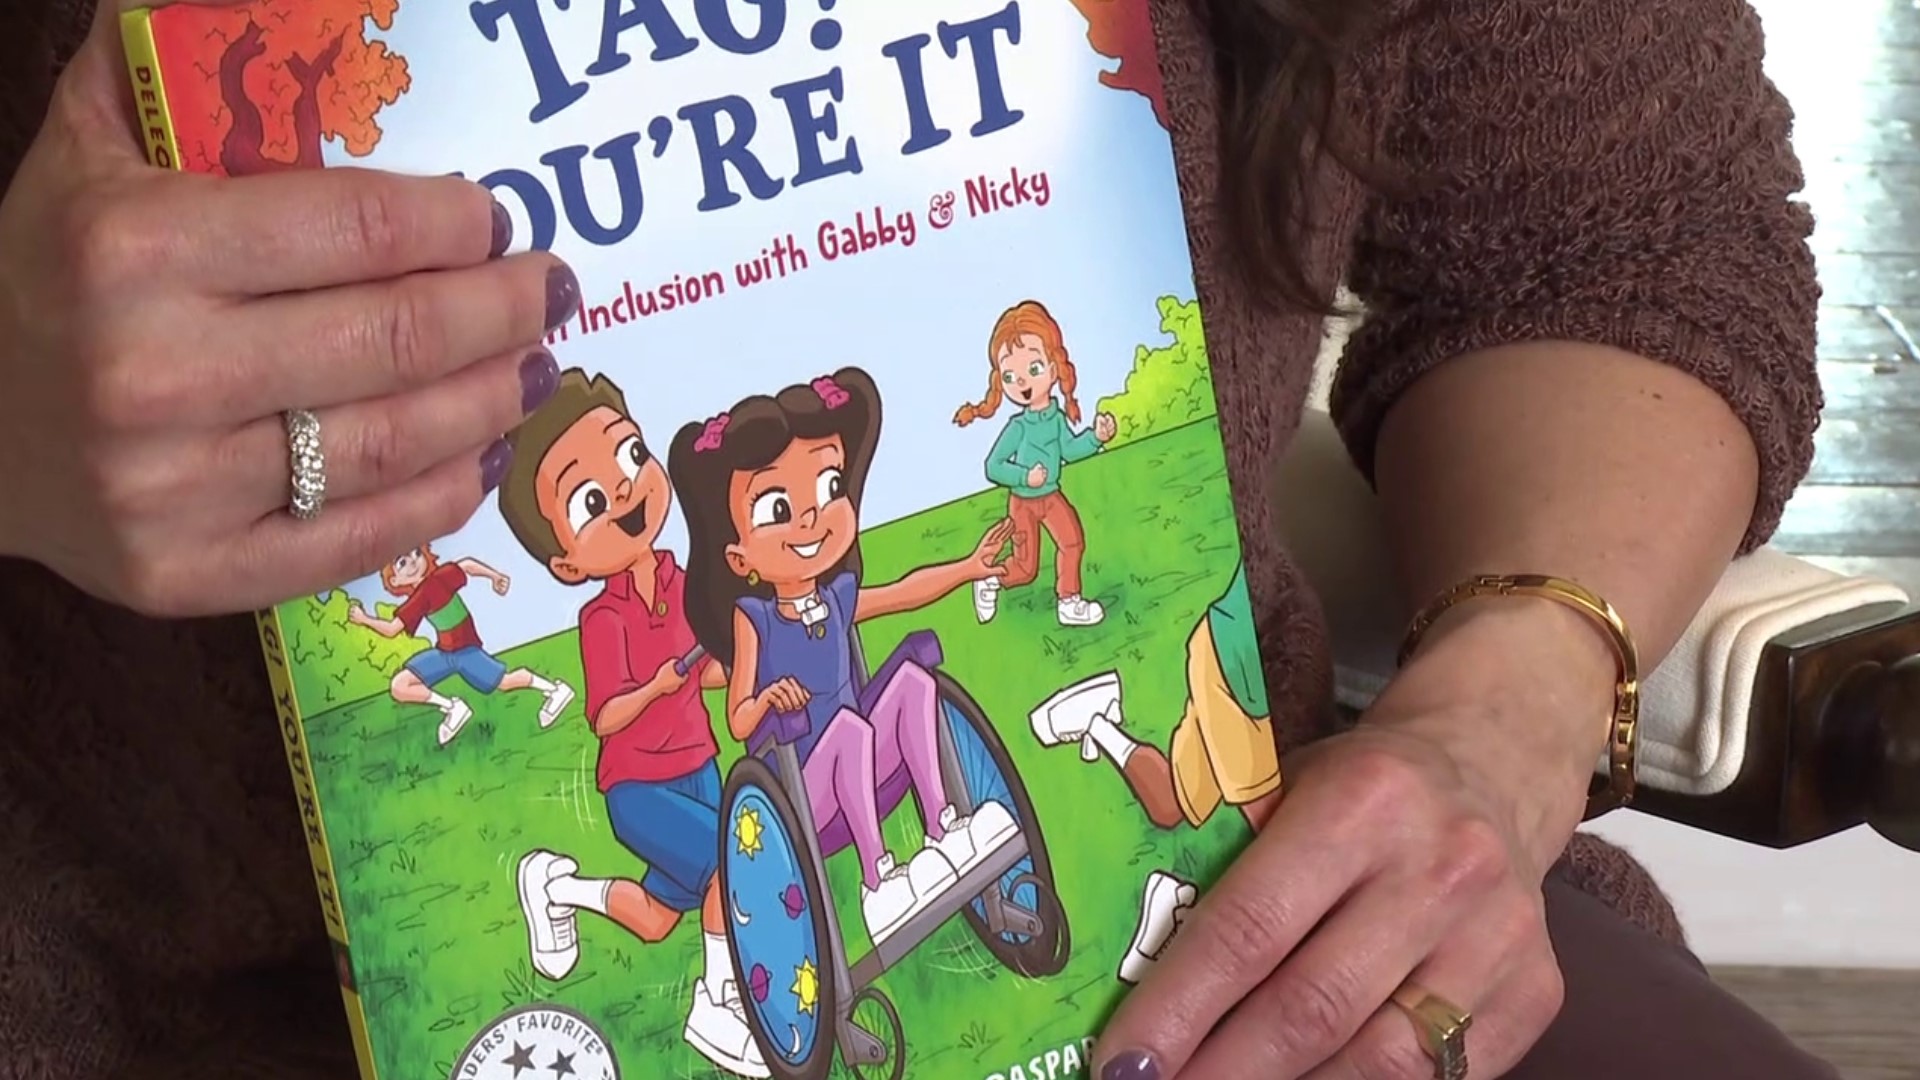 A Poconos mom is showing kids how to be more understanding. She hopes her new book, based on her two children with special needs, teaches a lesson on inclusion.